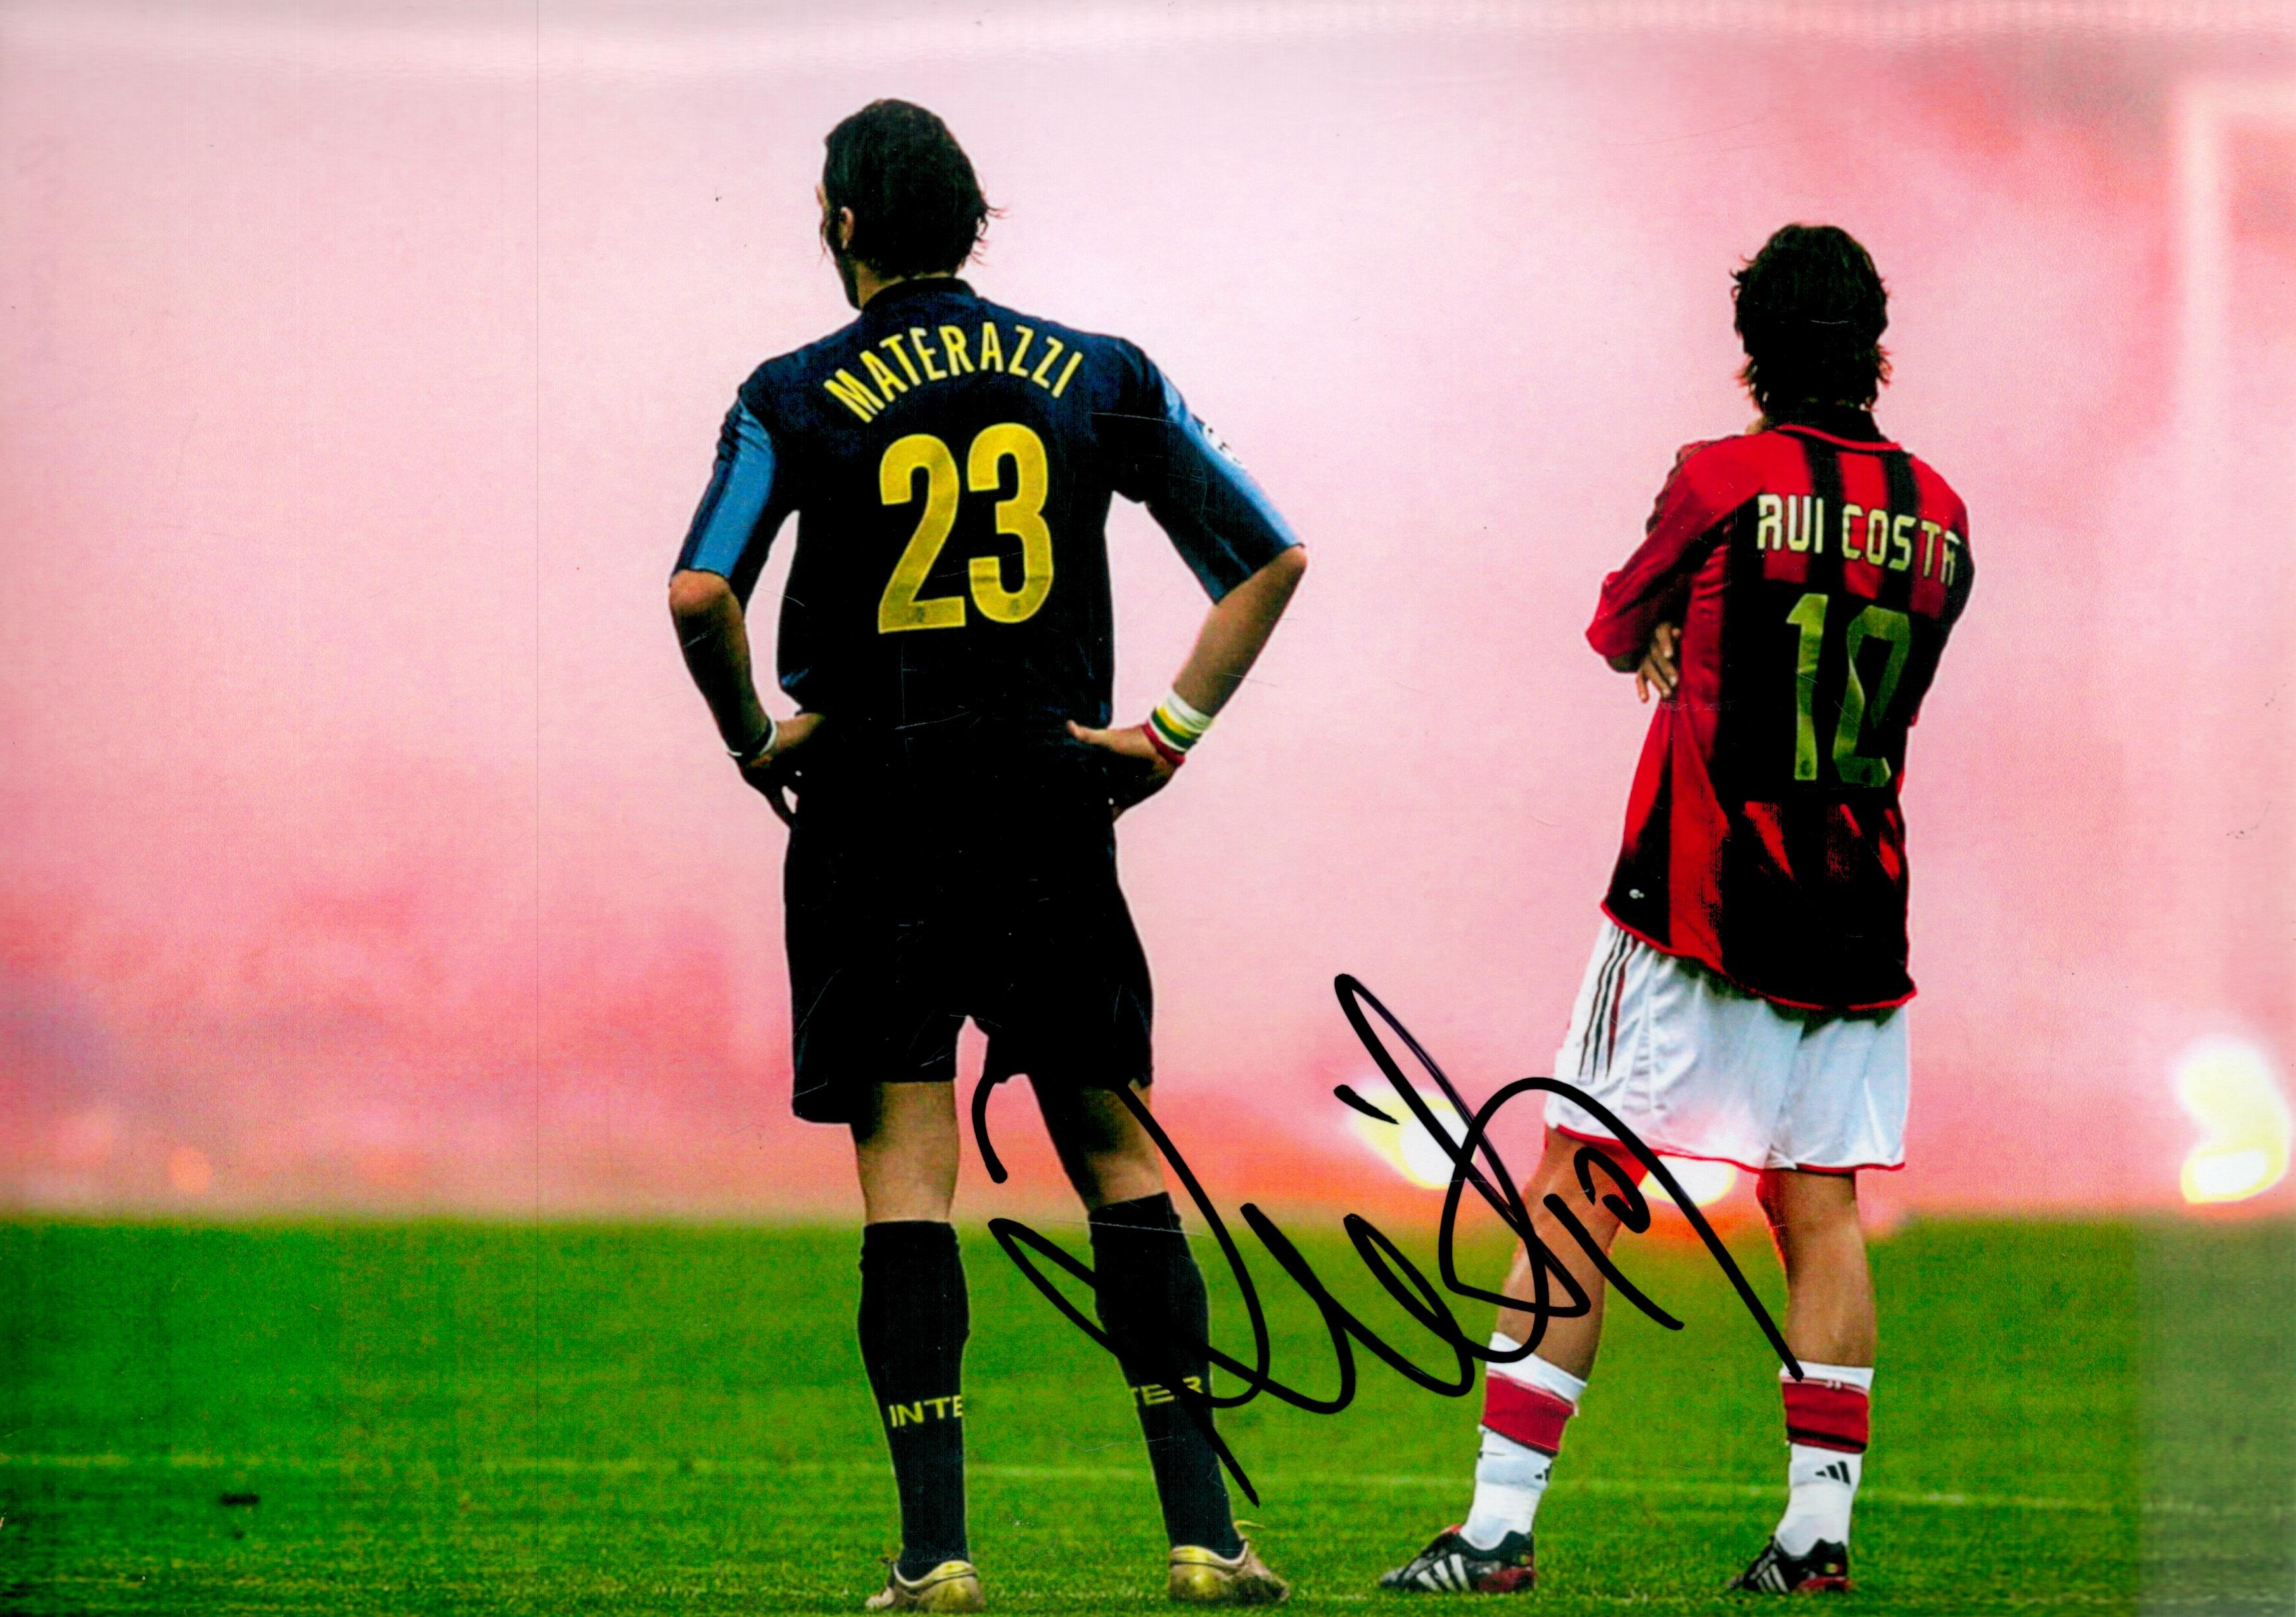 Football Rui Costa signed AC Milan 12x8 colour photo. Good Condition. All autographs come with a